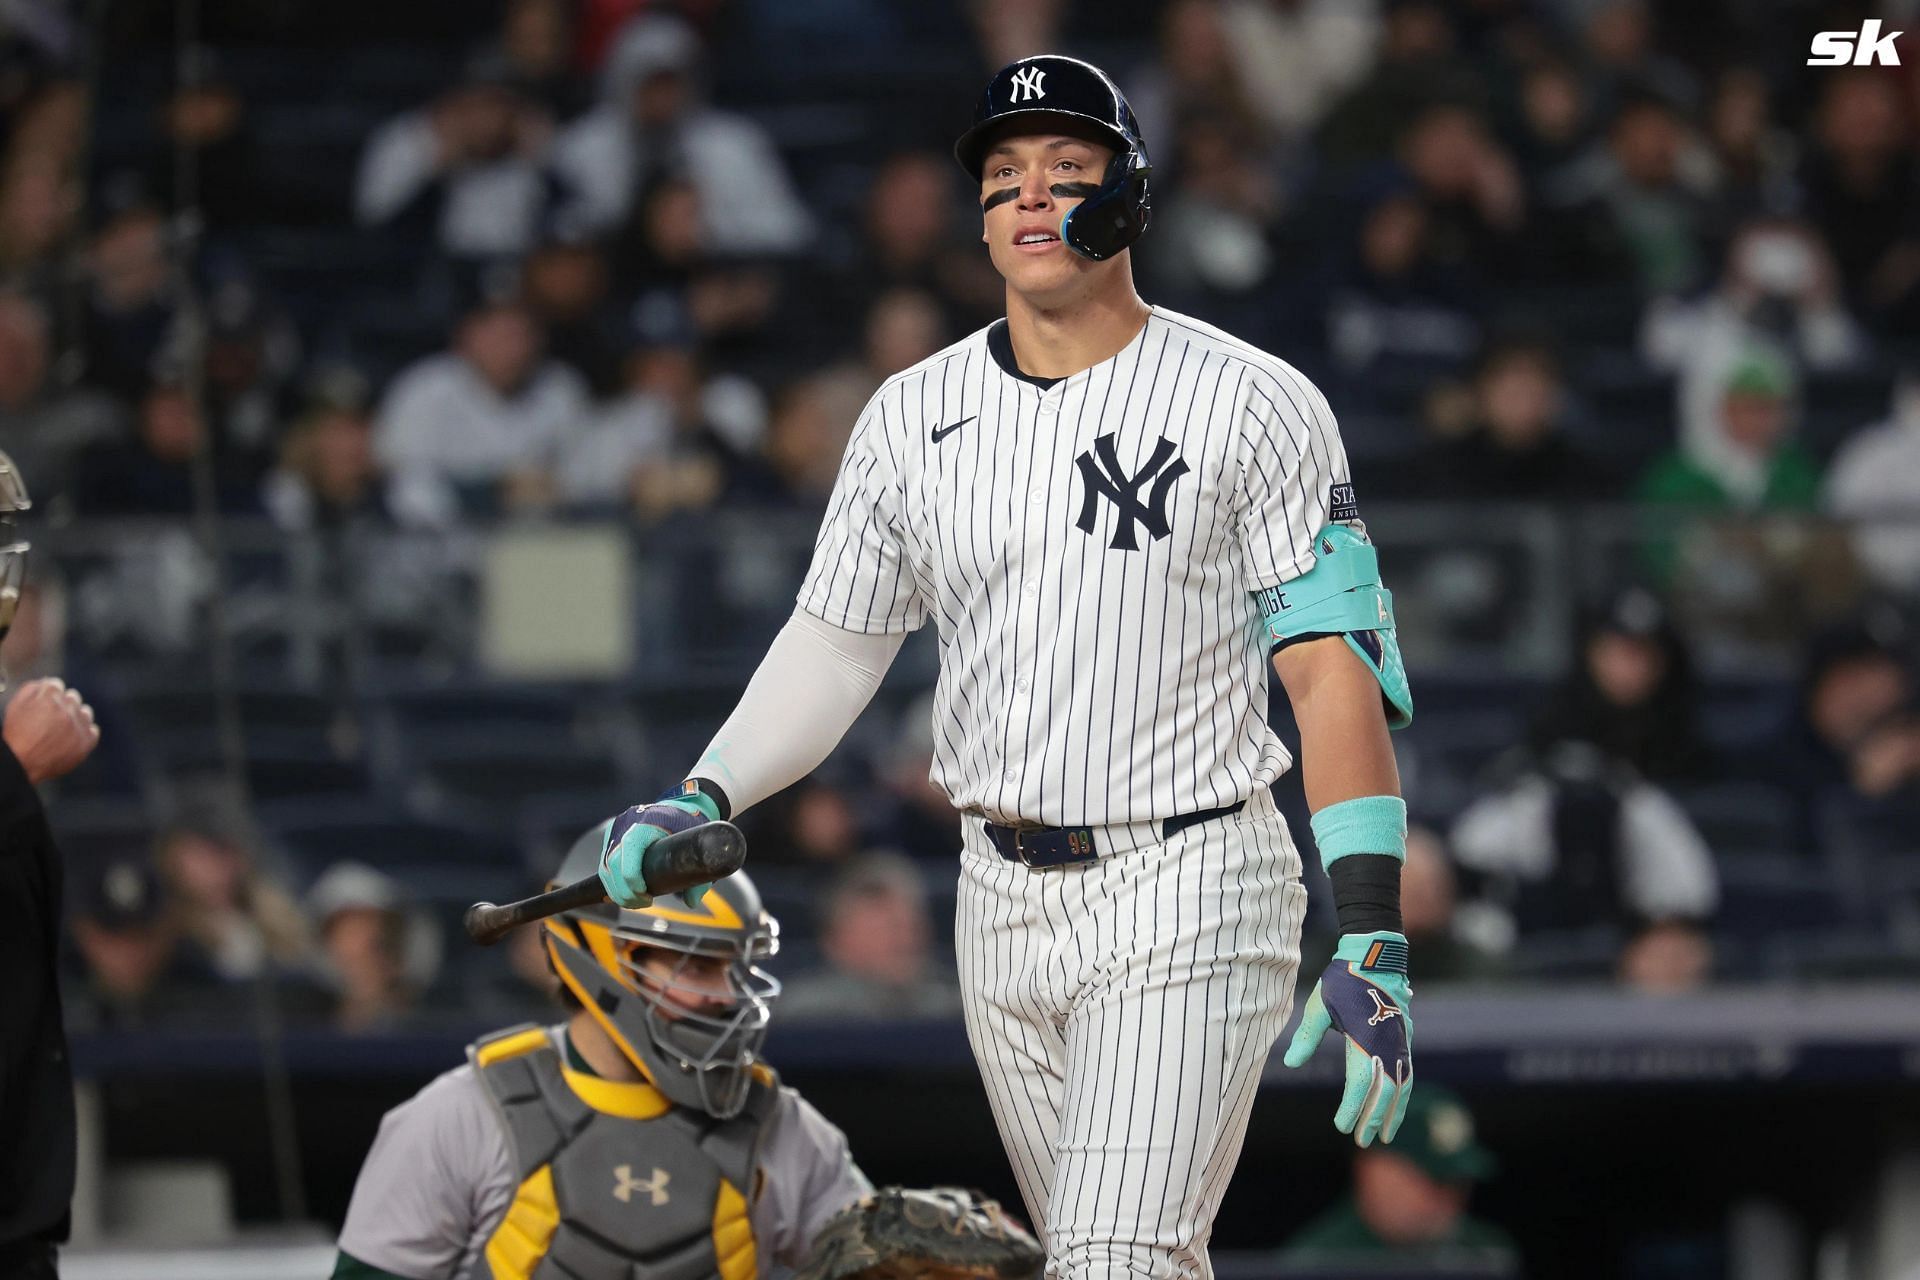 Yankees fans upset as team struggles to score following series split with Athletics